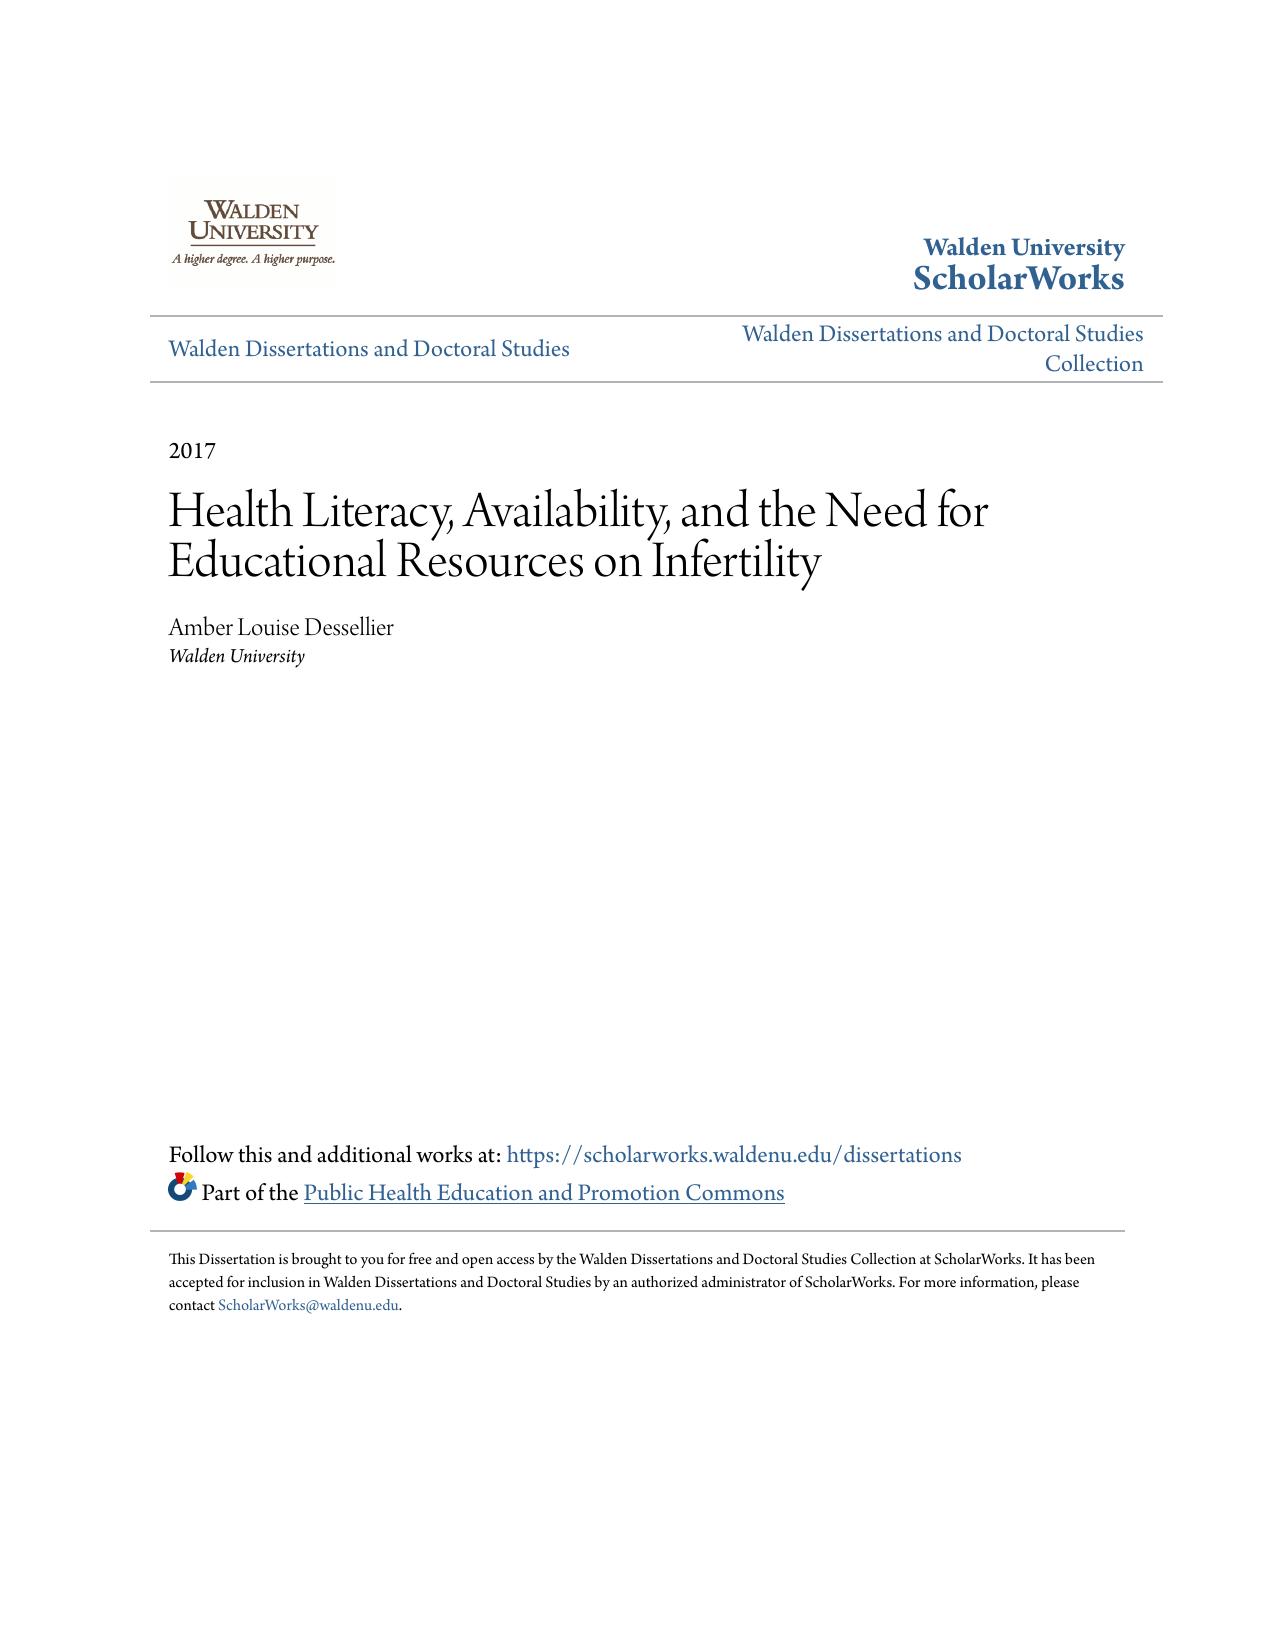 Health Literacy, Availability, and the Need for Educational Resources on Infertility